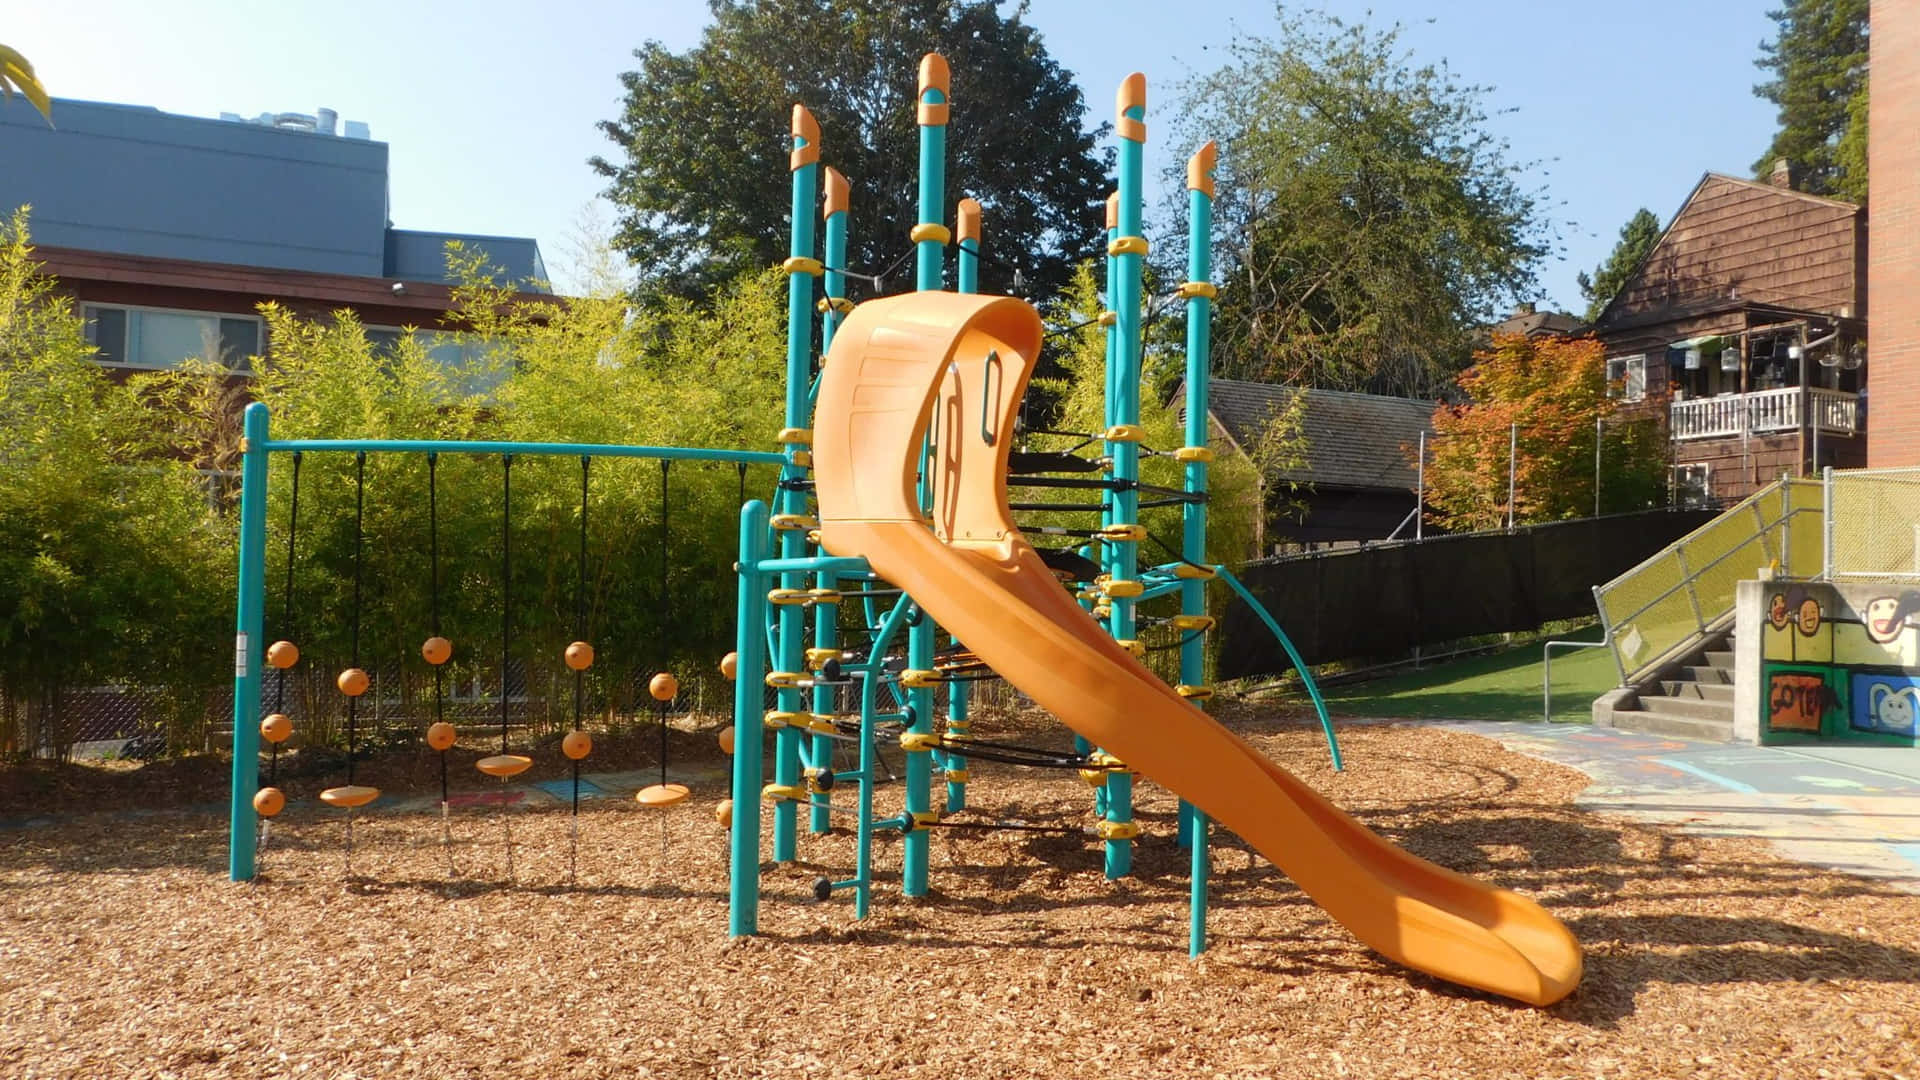 Children playing on a vibrant playground